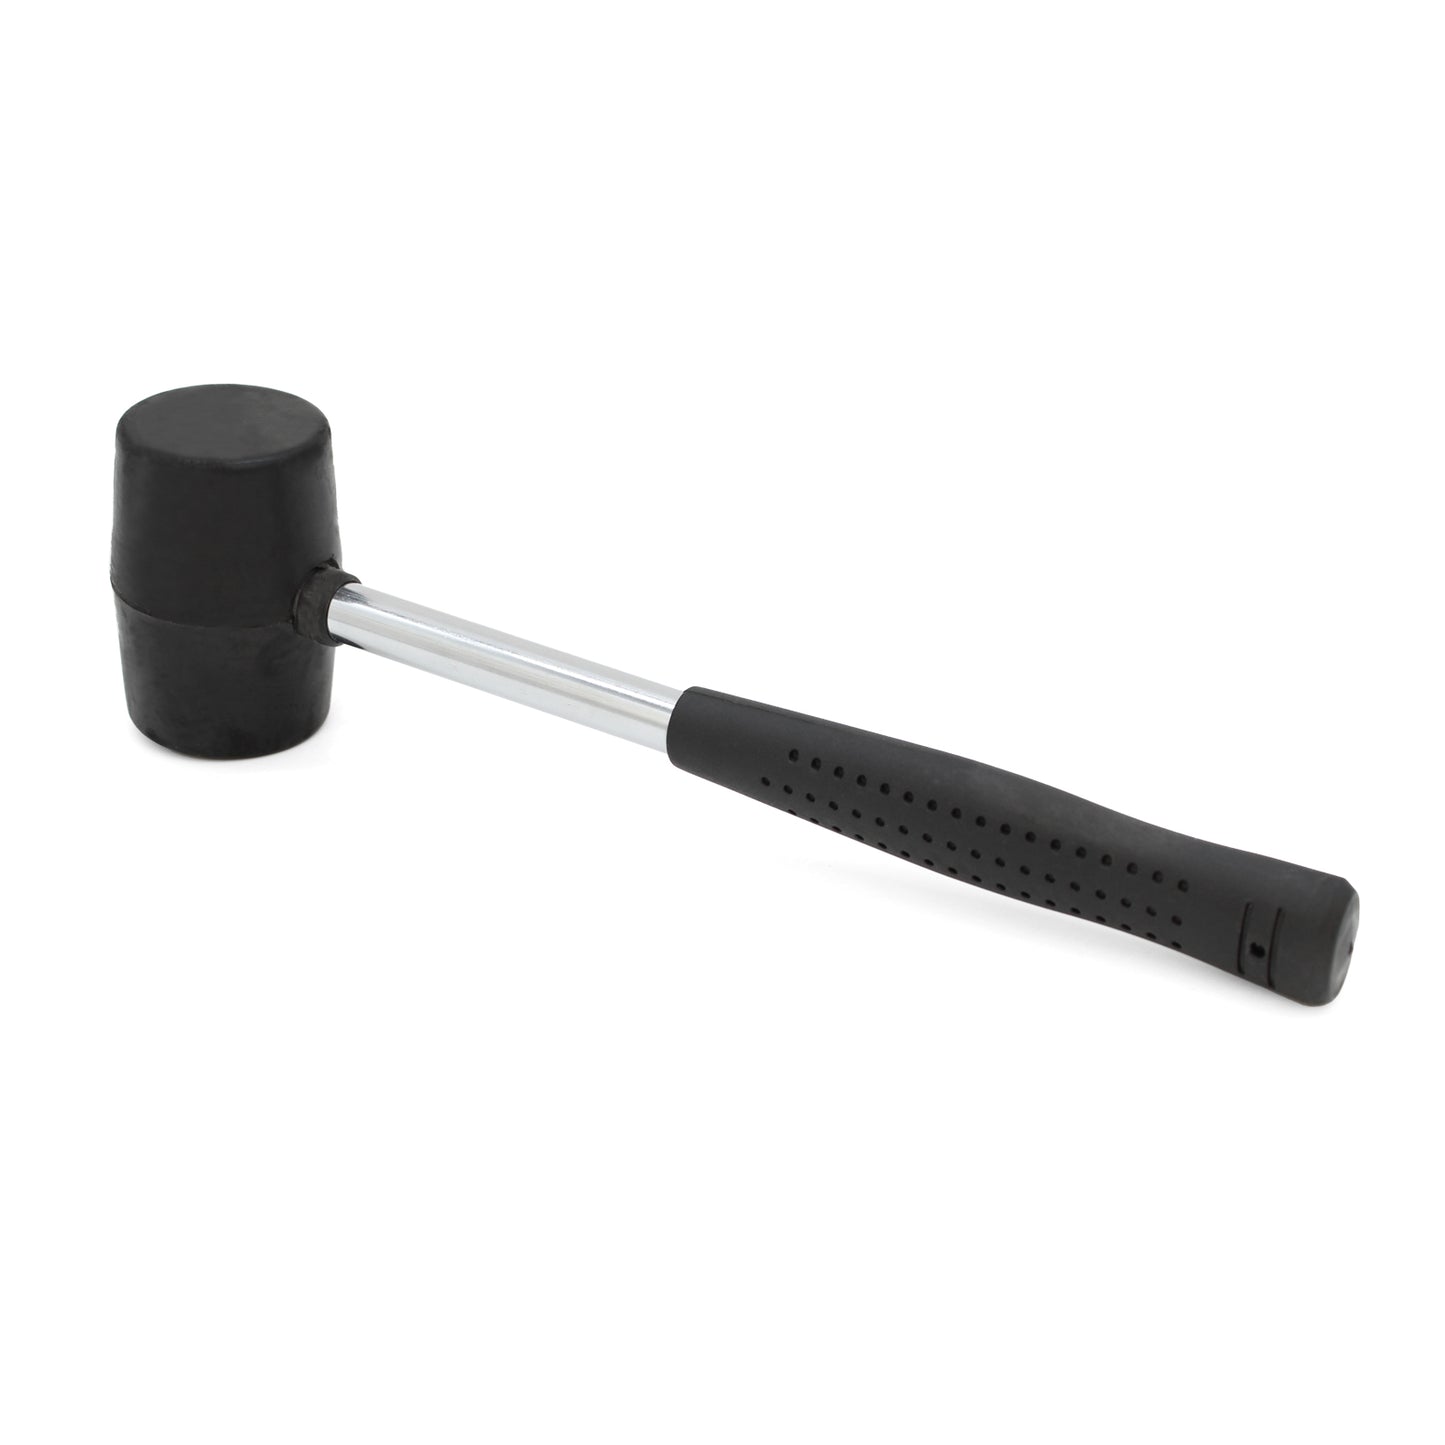 Rubber Camping Mallet